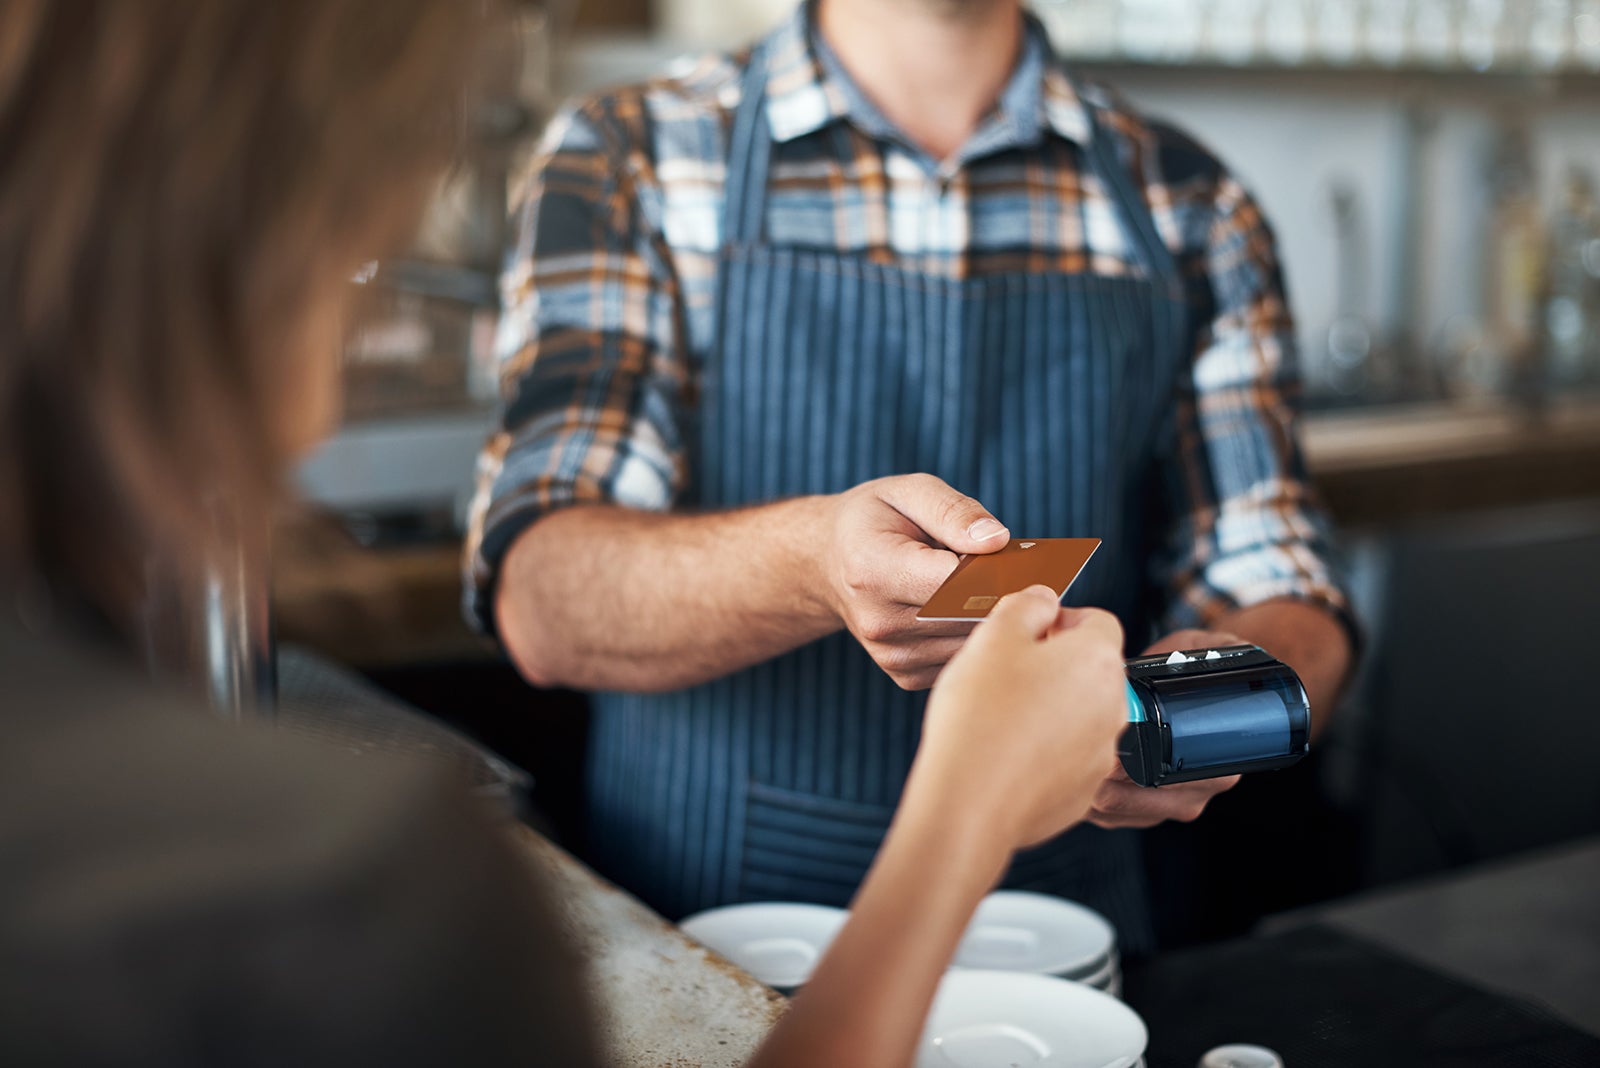 Closeup shot of a unrecognizable person giving a barman a credit card as payment inside of a restaurant